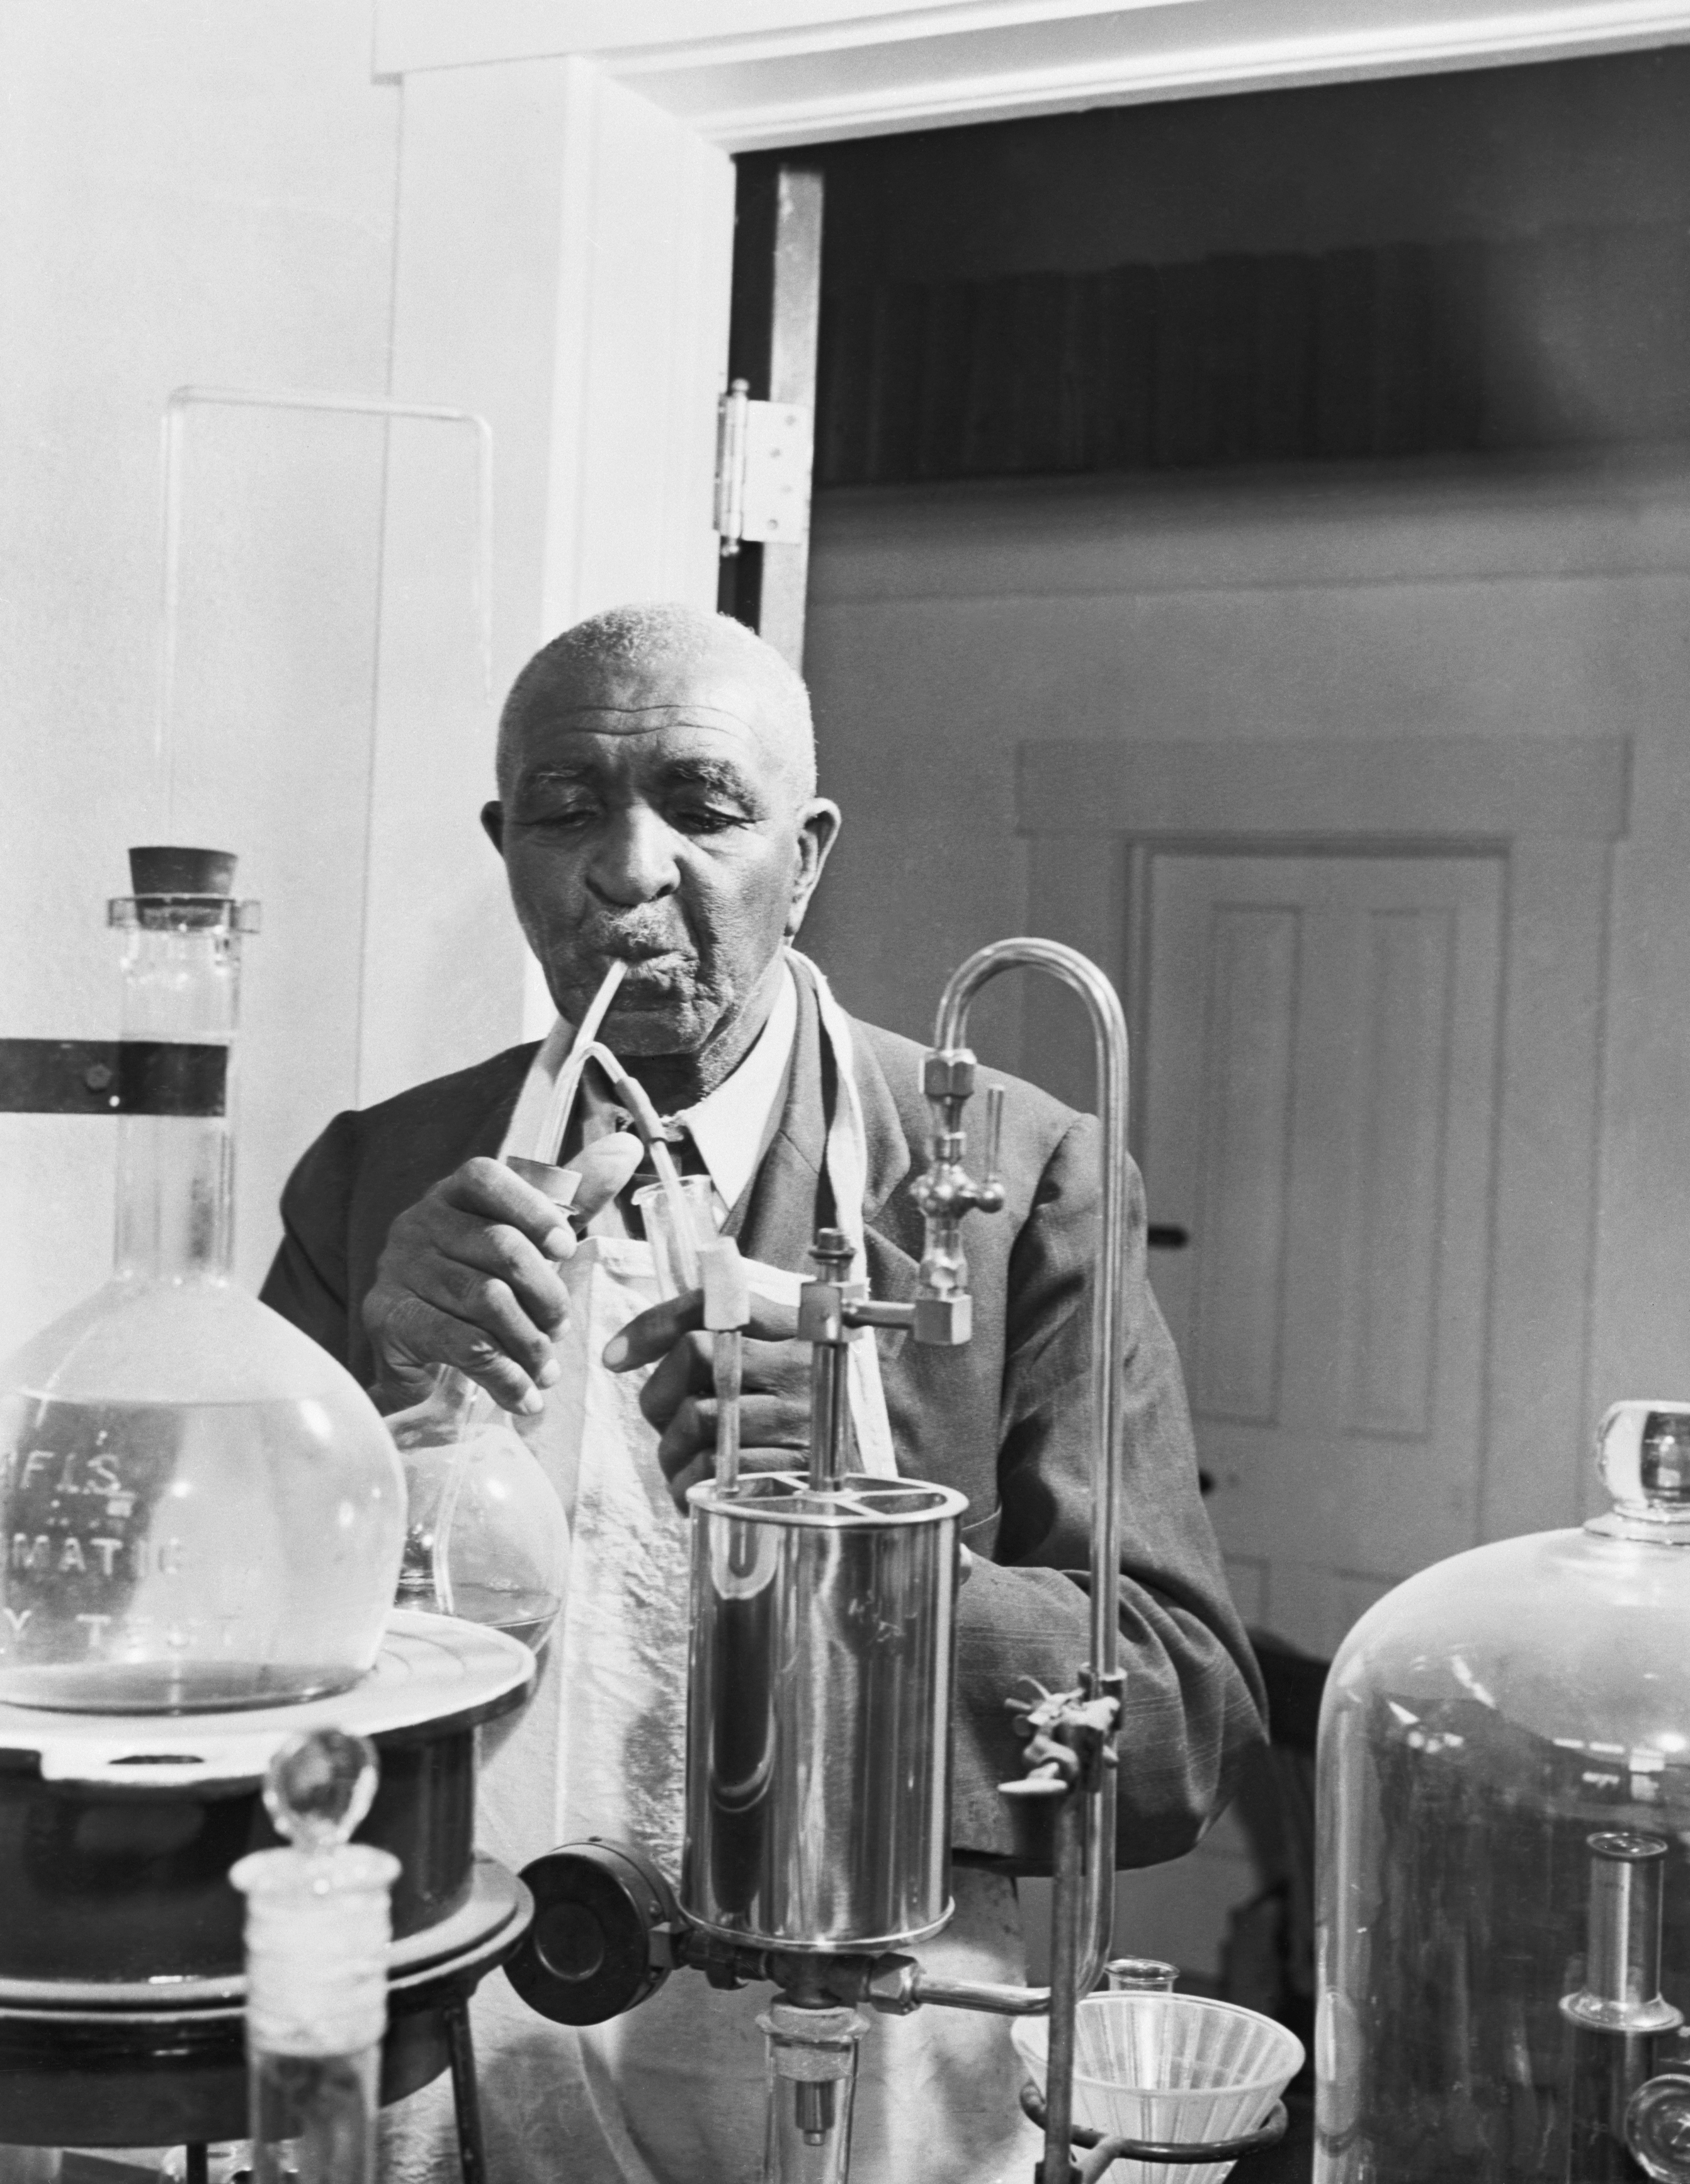 A man working with laboratory glassware and apparatus